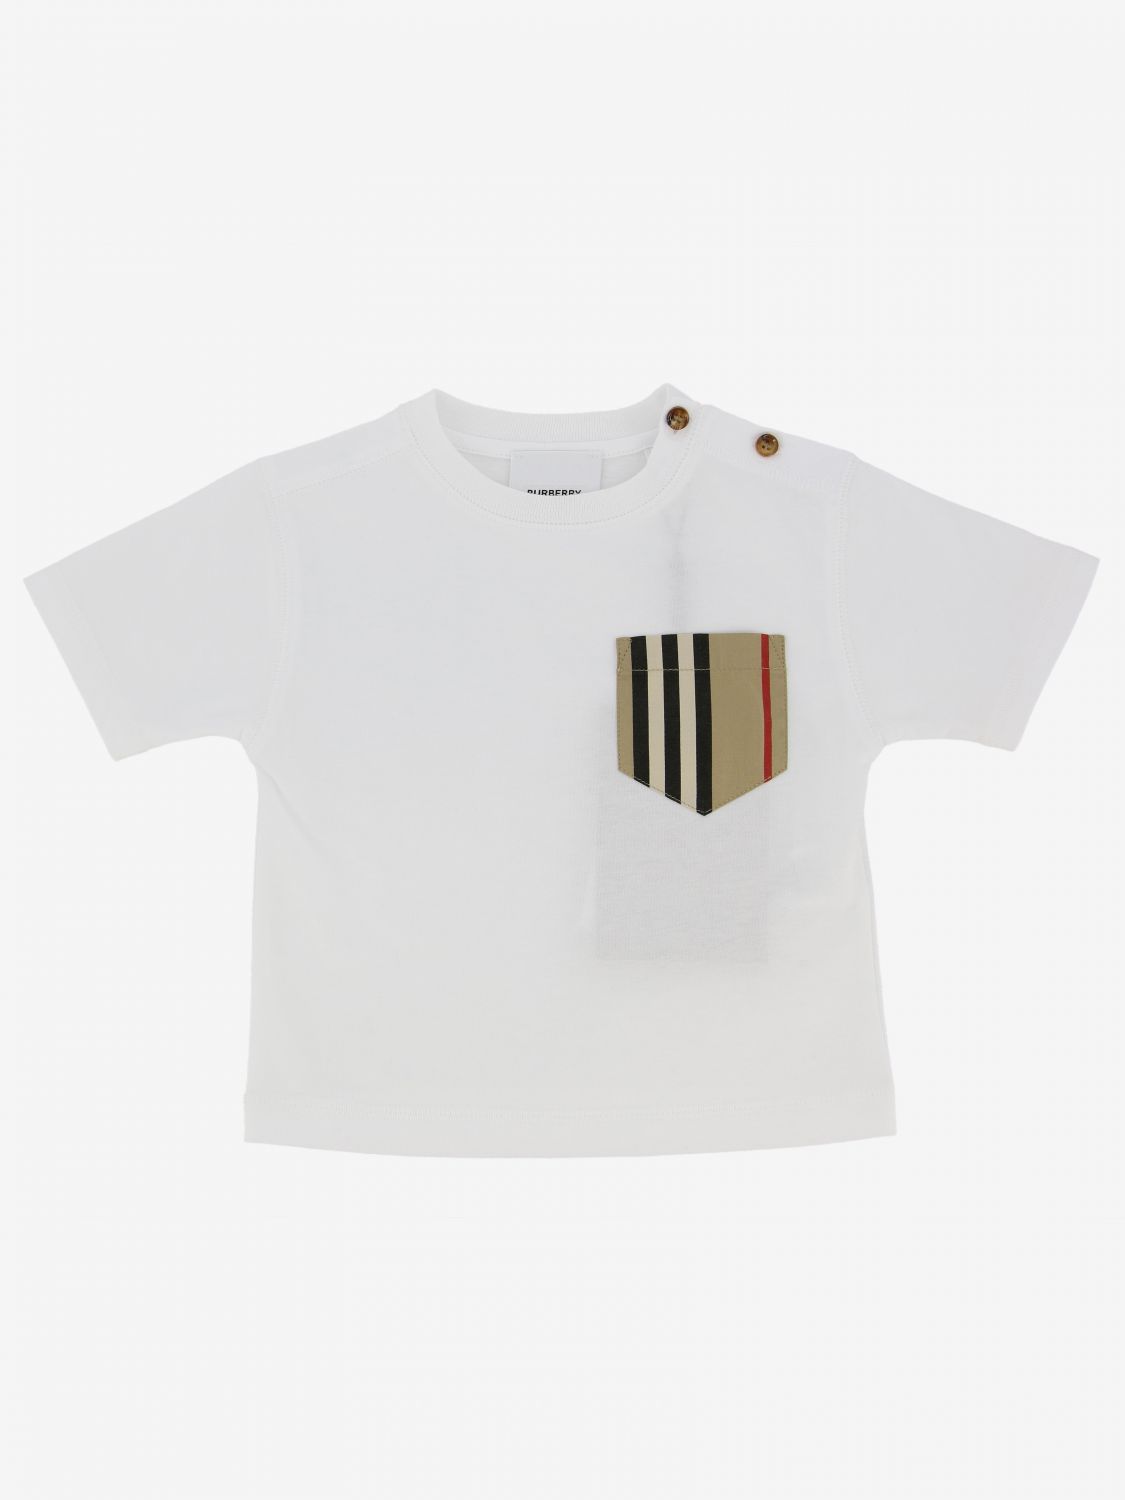 youth burberry shirt